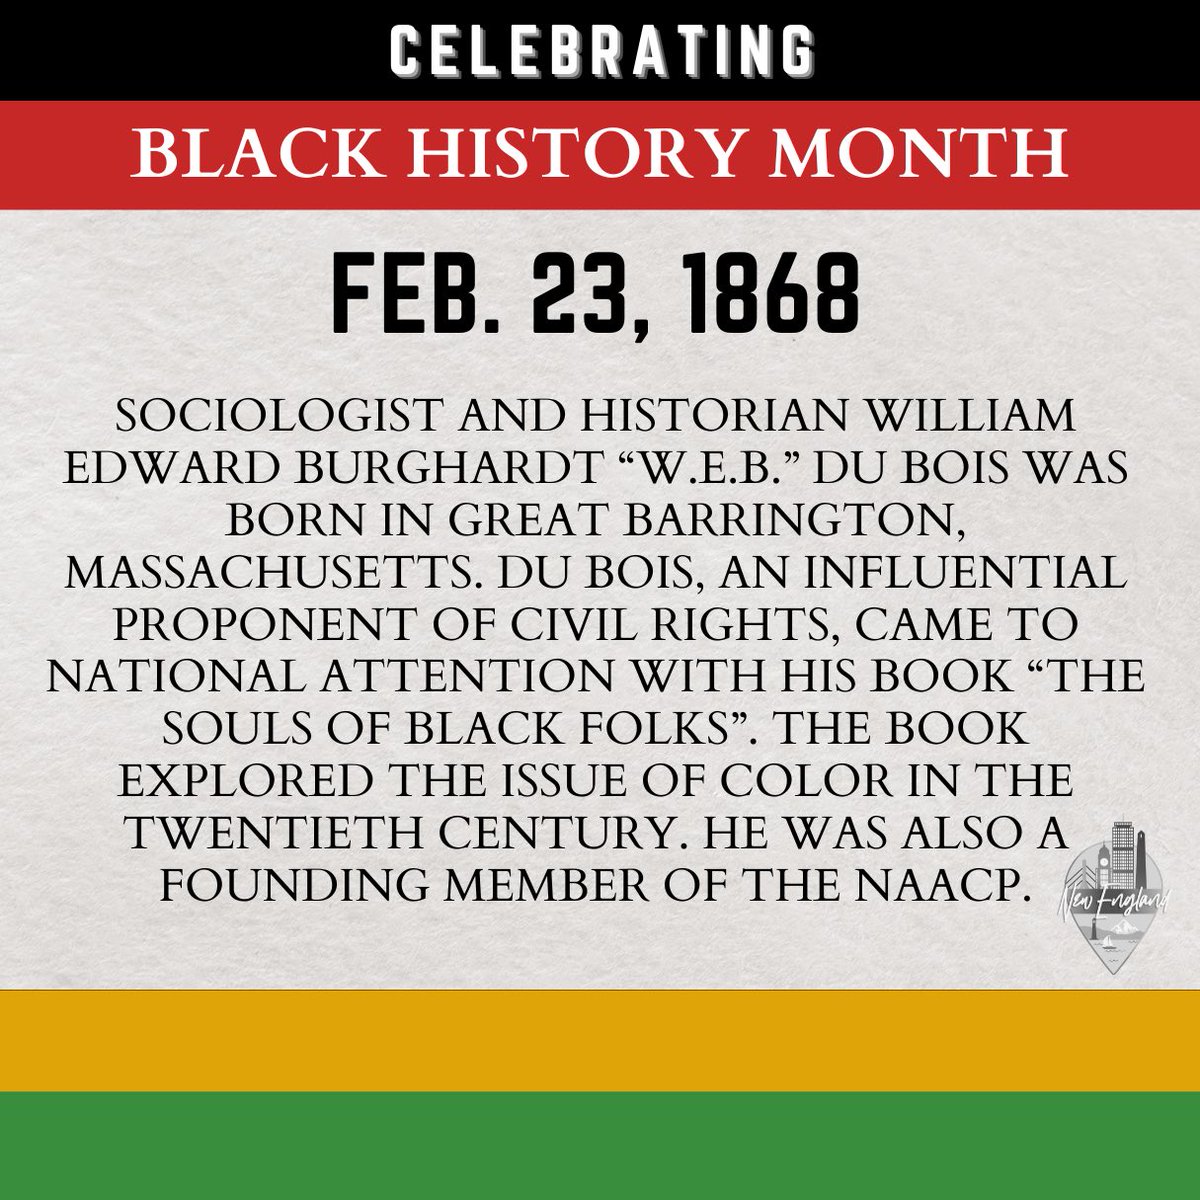 Today in Black History, we recognize a Massachusetts native.